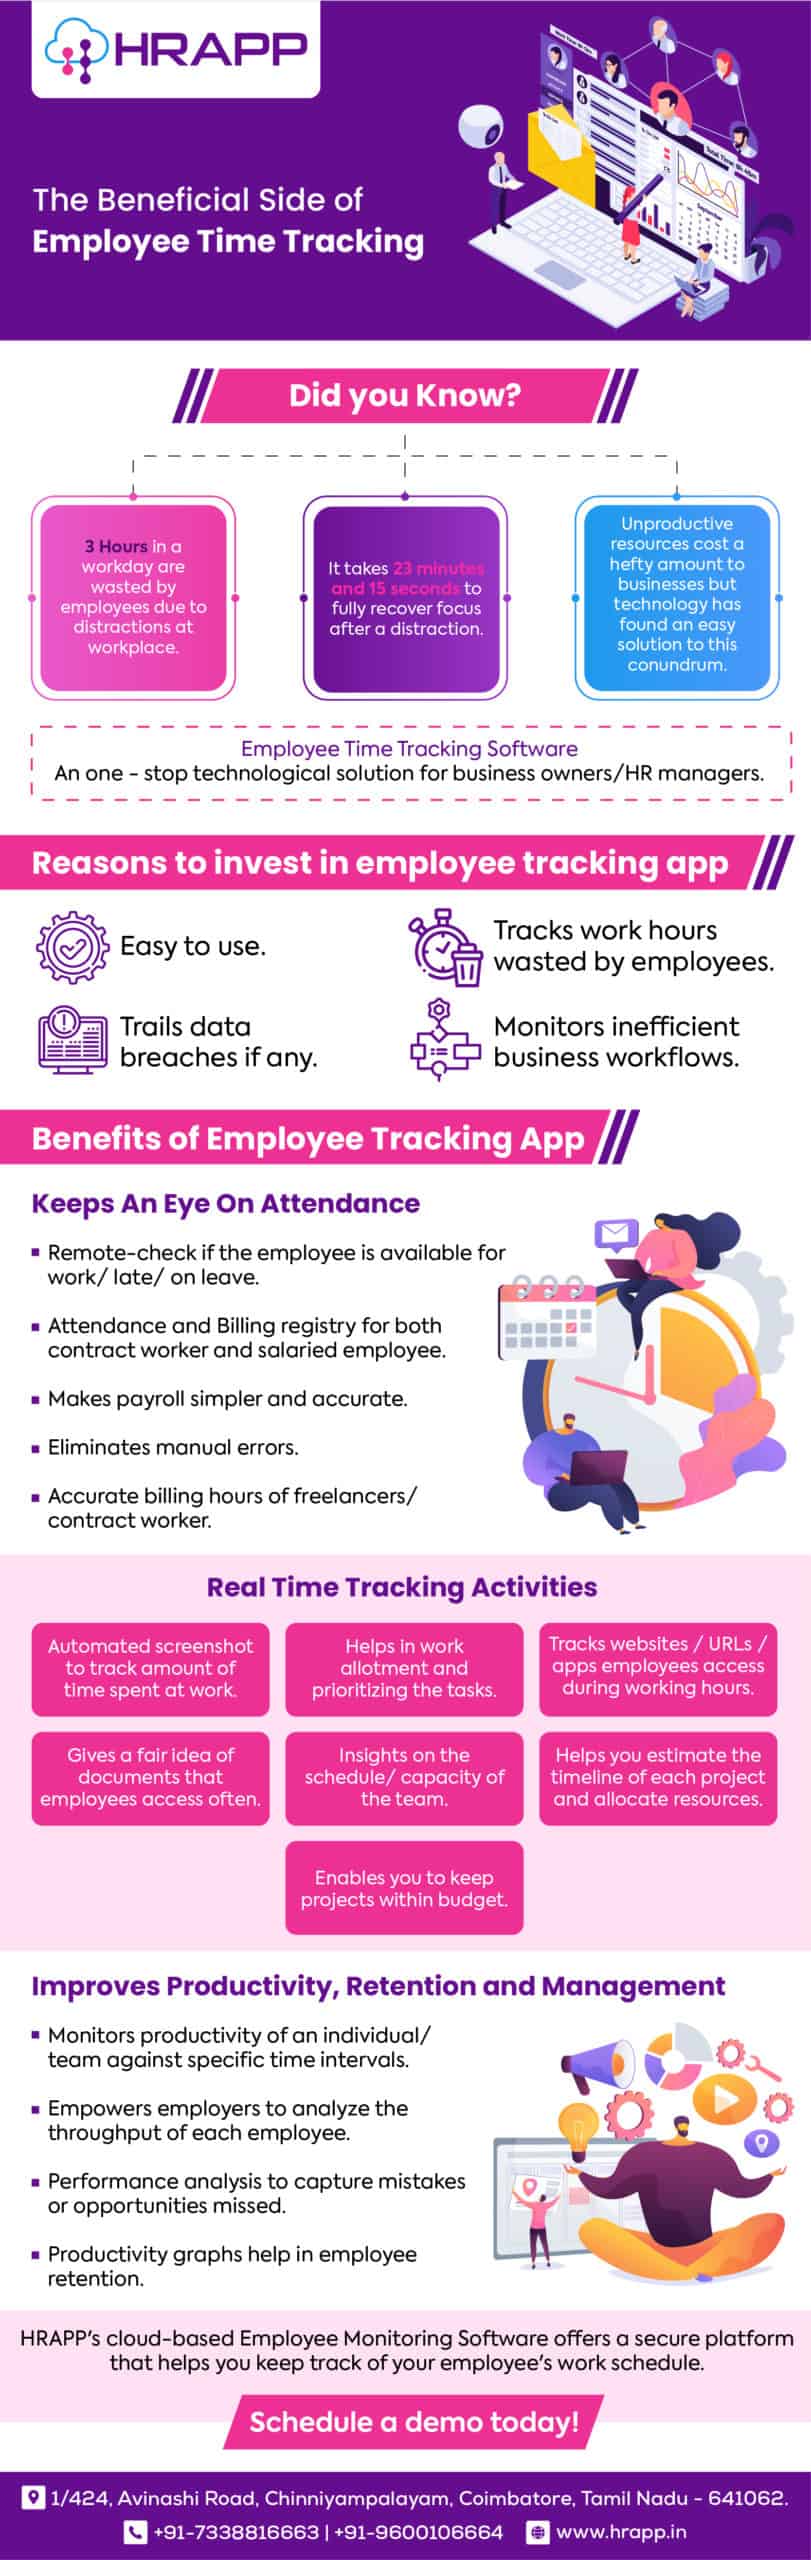 Why To Use Employee Time Tracking Software In India?